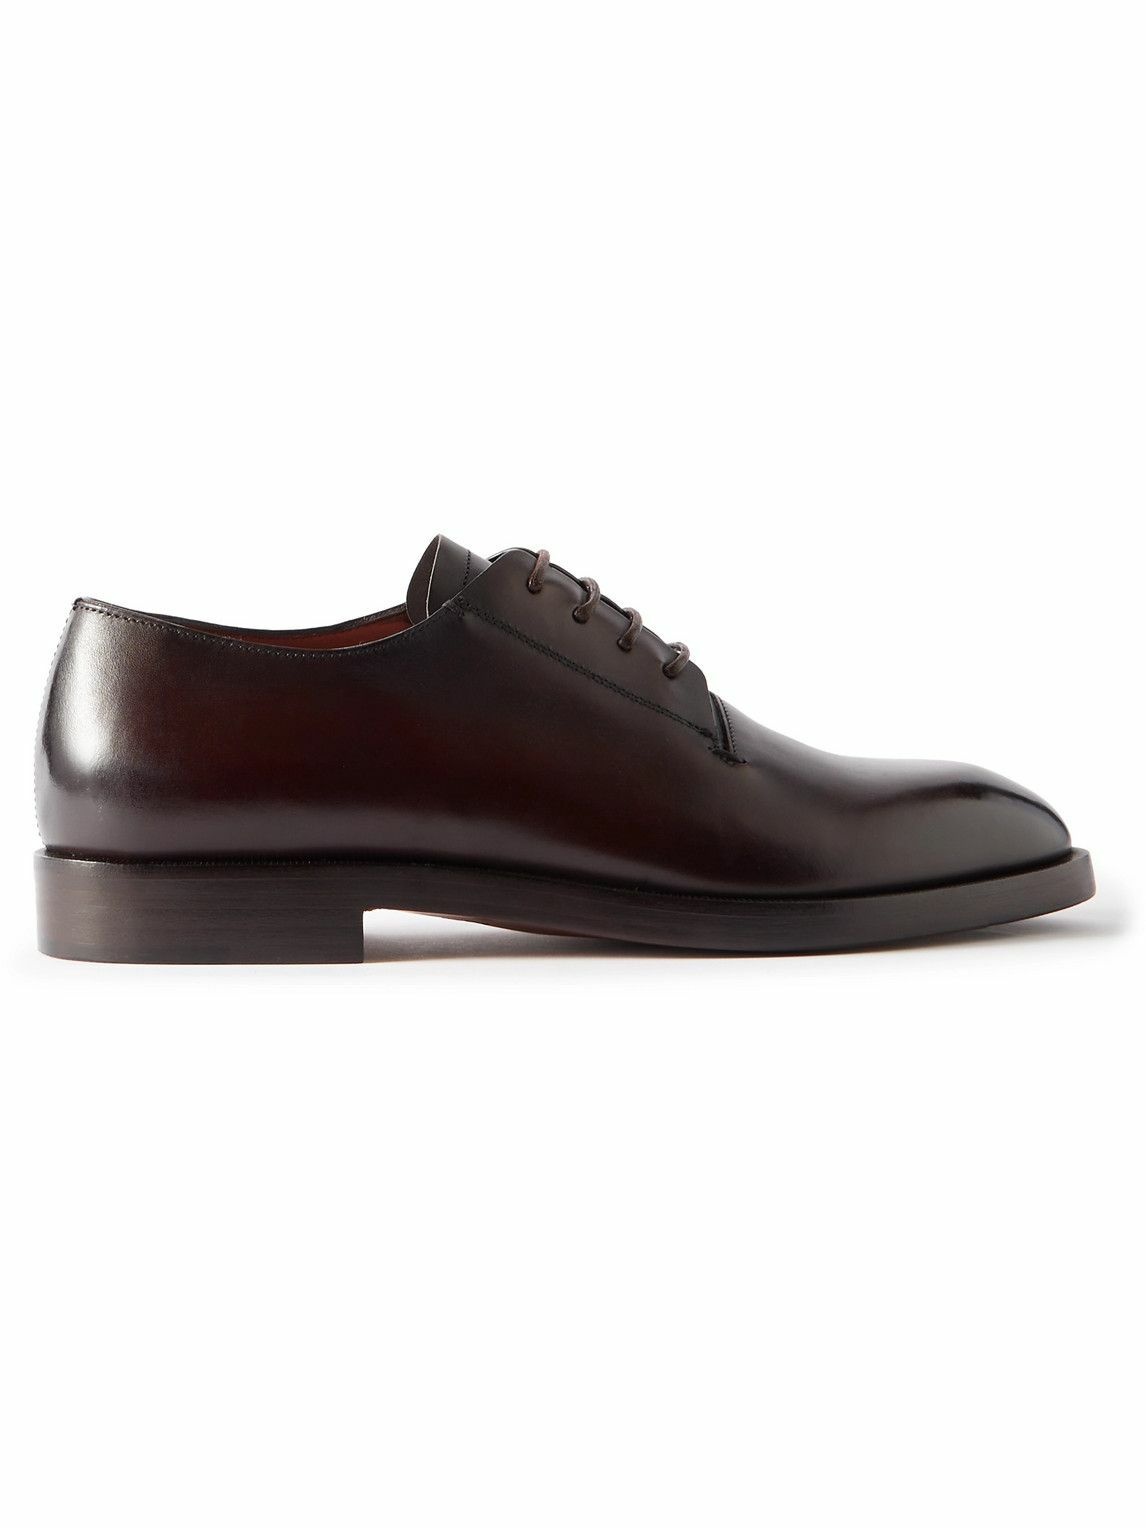 Photo: Zegna - Torino Leather Oxford Shoes - Brown